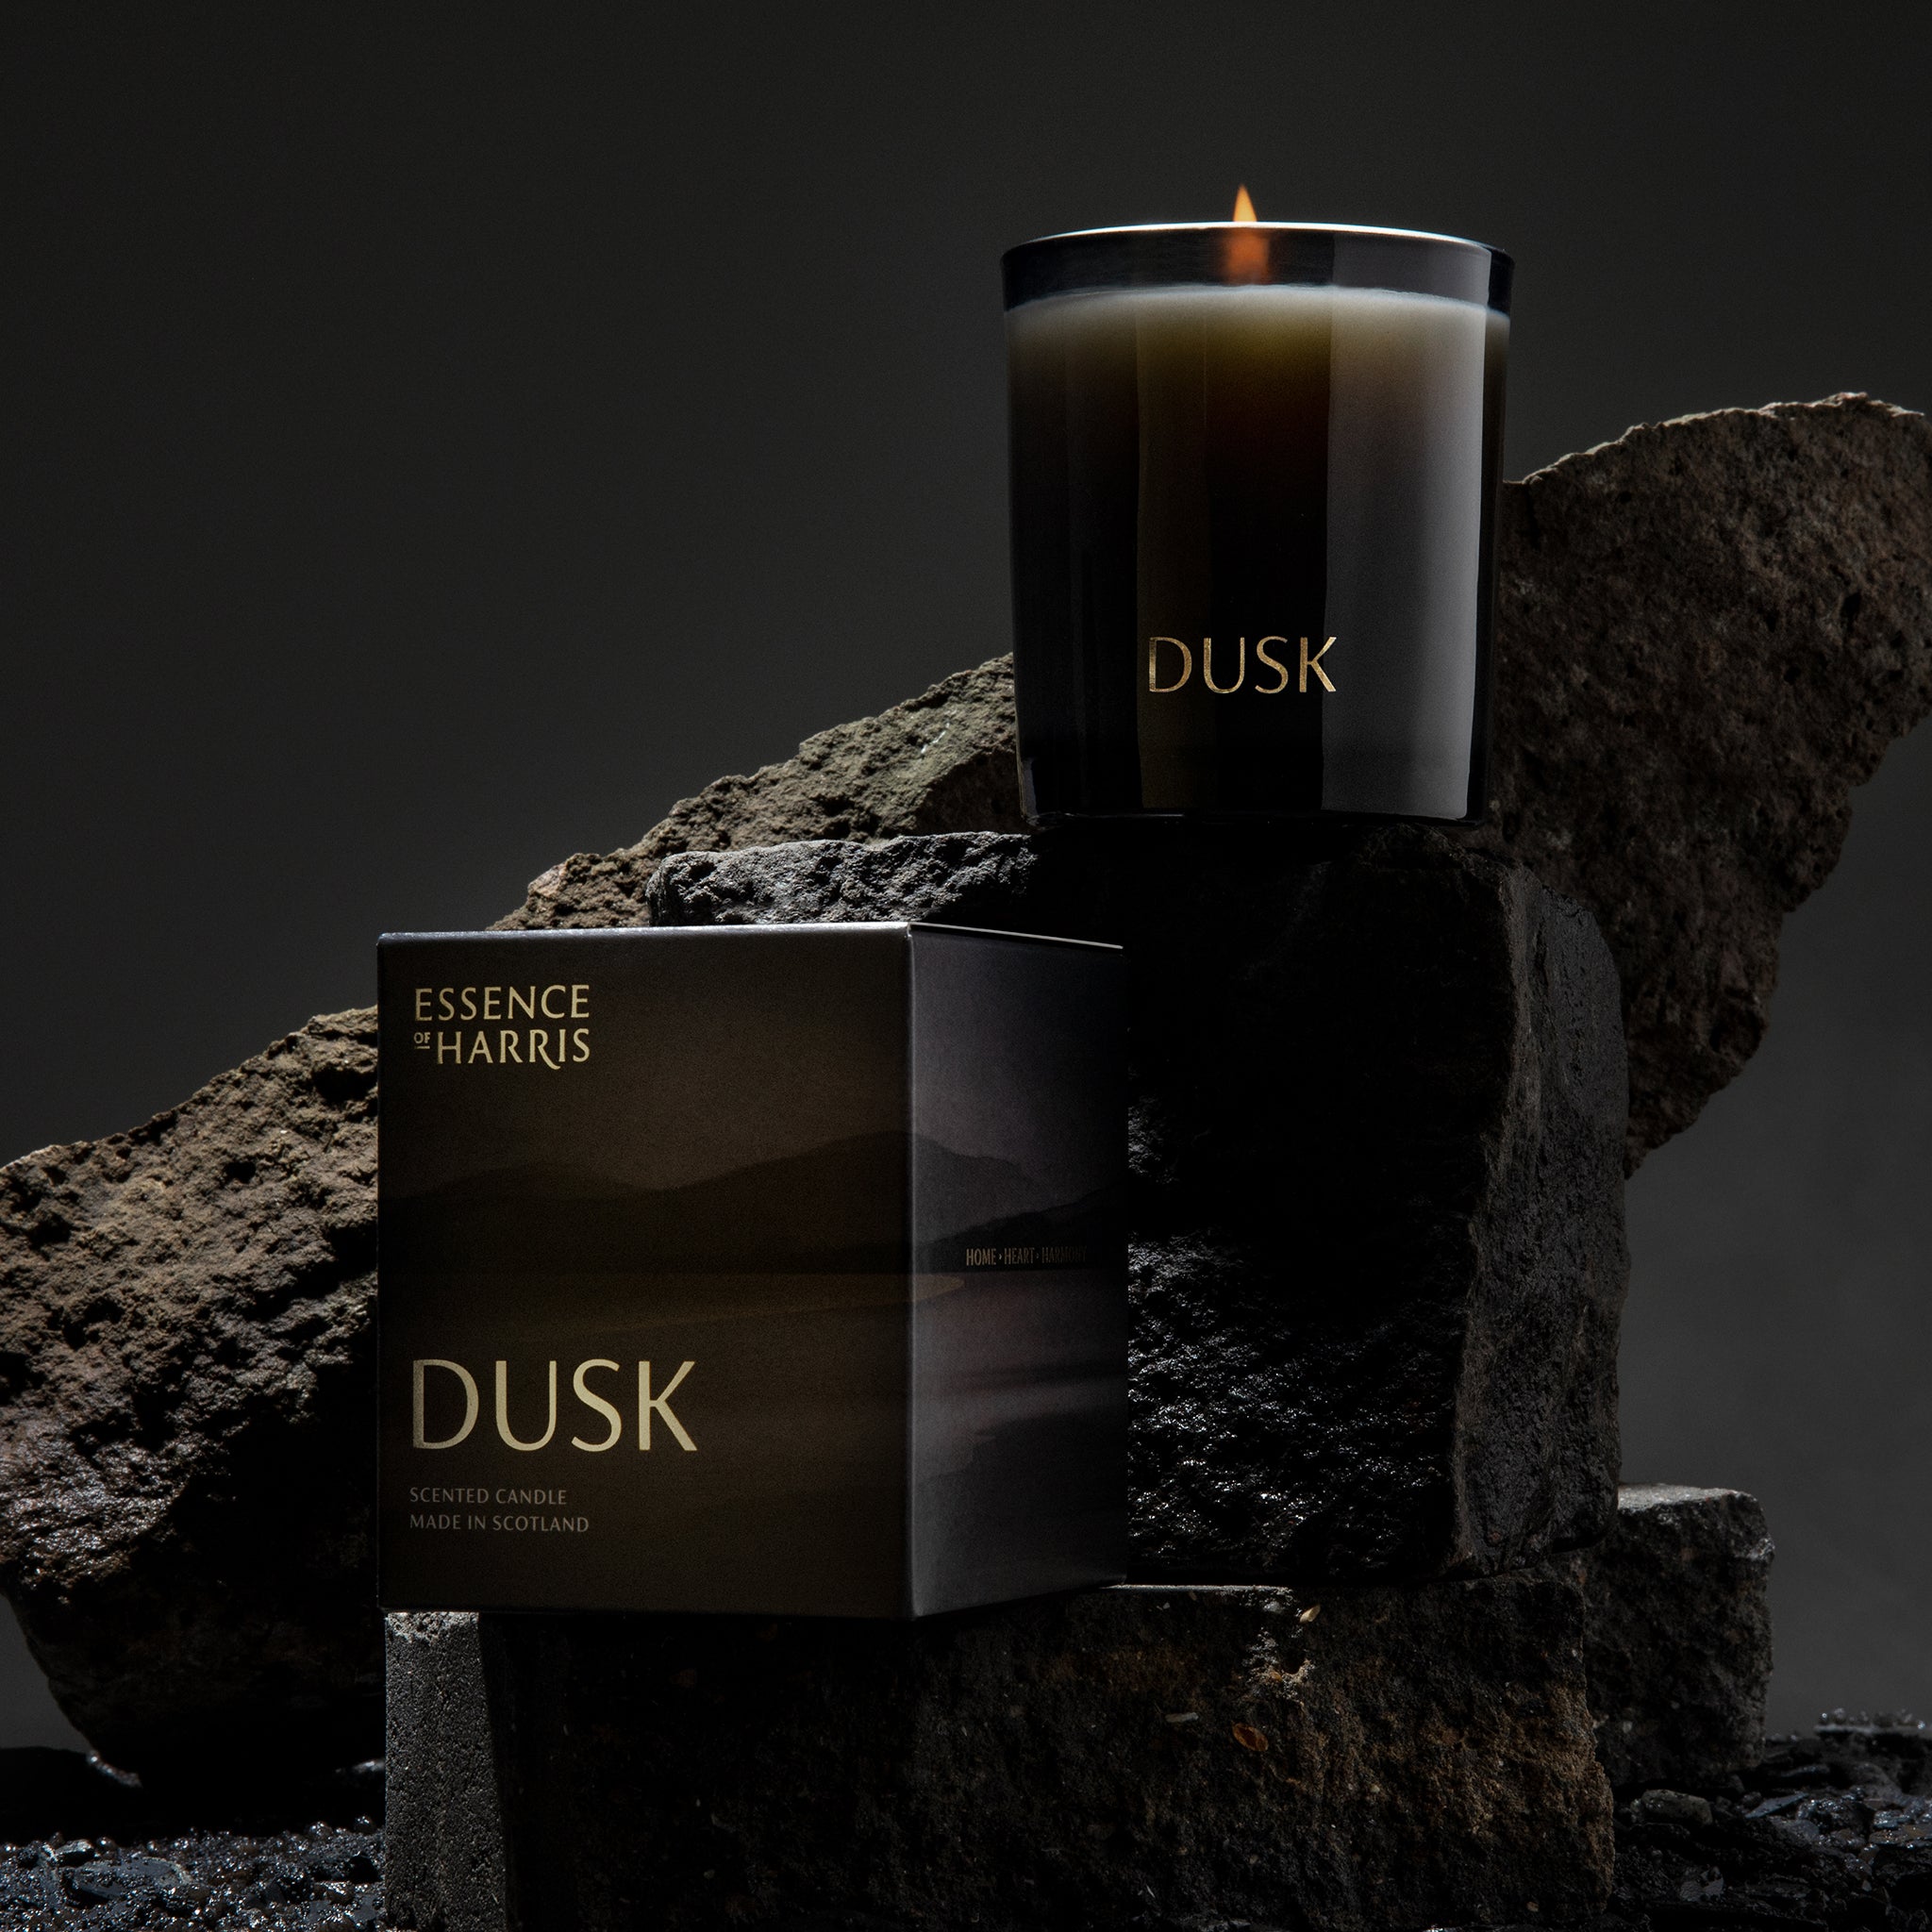 Dusk, wild rhubarb soy wax candle in black smoked glass bottle with gold writing next to sunset illustrated box